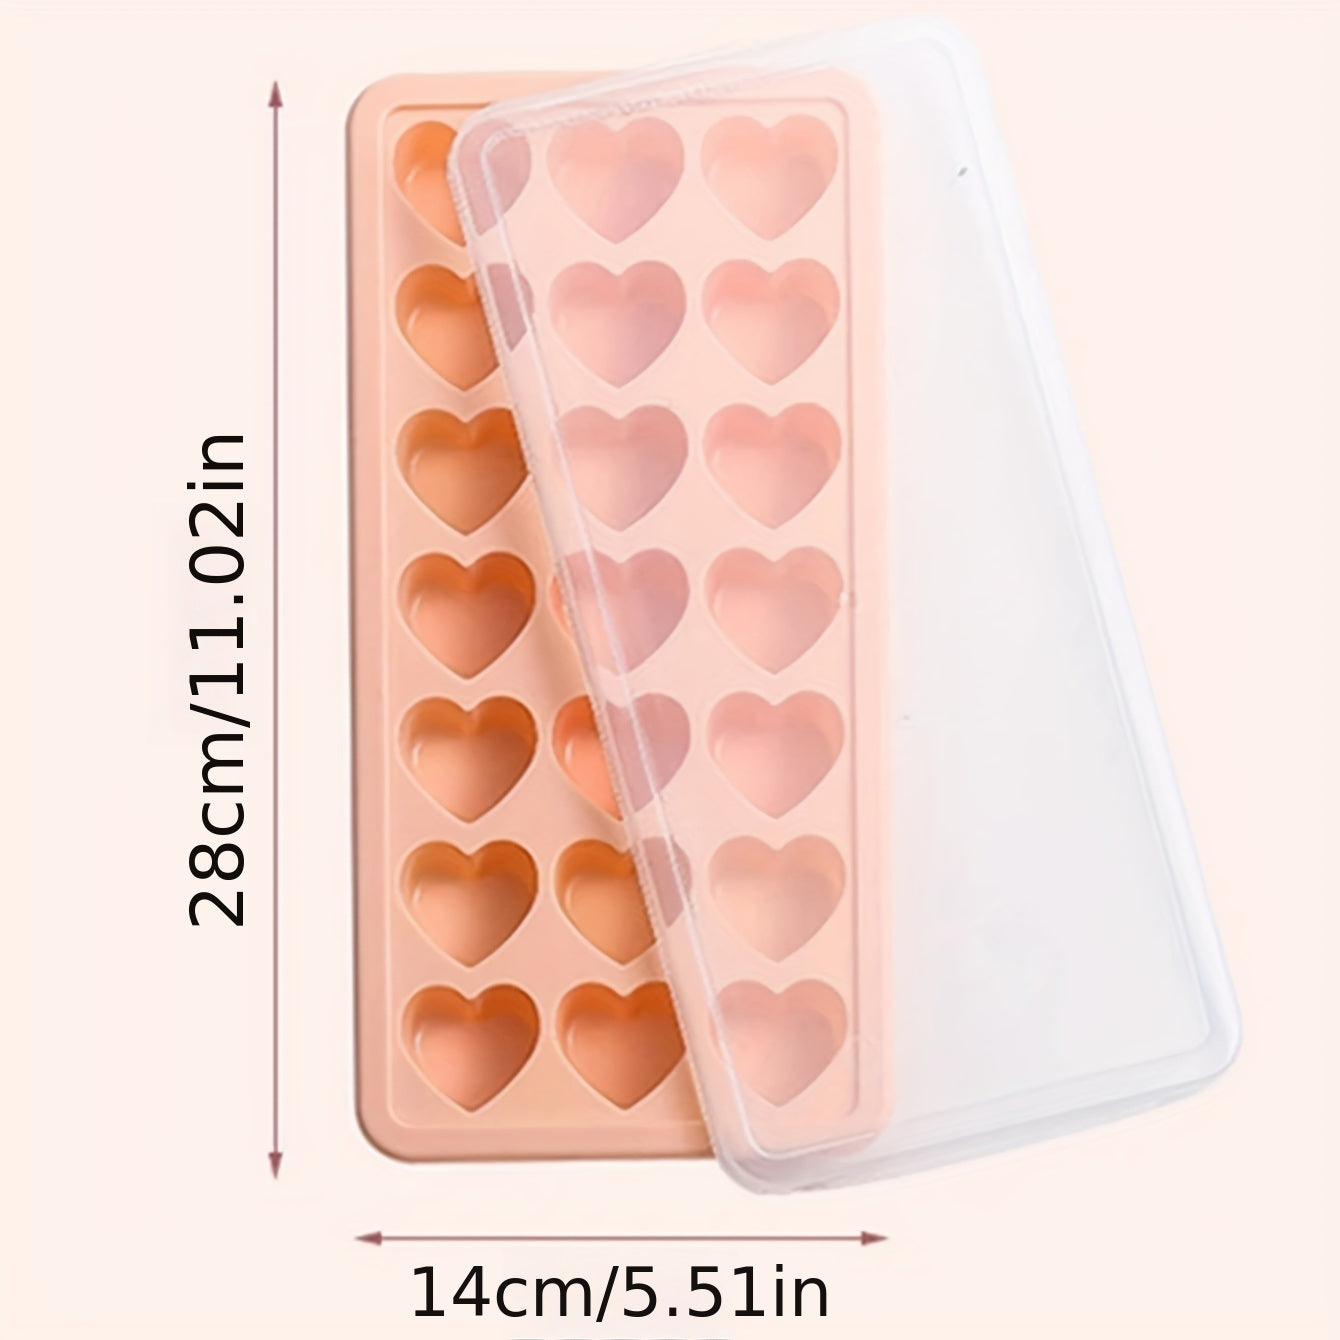 1pc High Quality Silicone 21 Even Love Ice Cube Ice Tray Mold Heart Shaped Silicone Ice Box